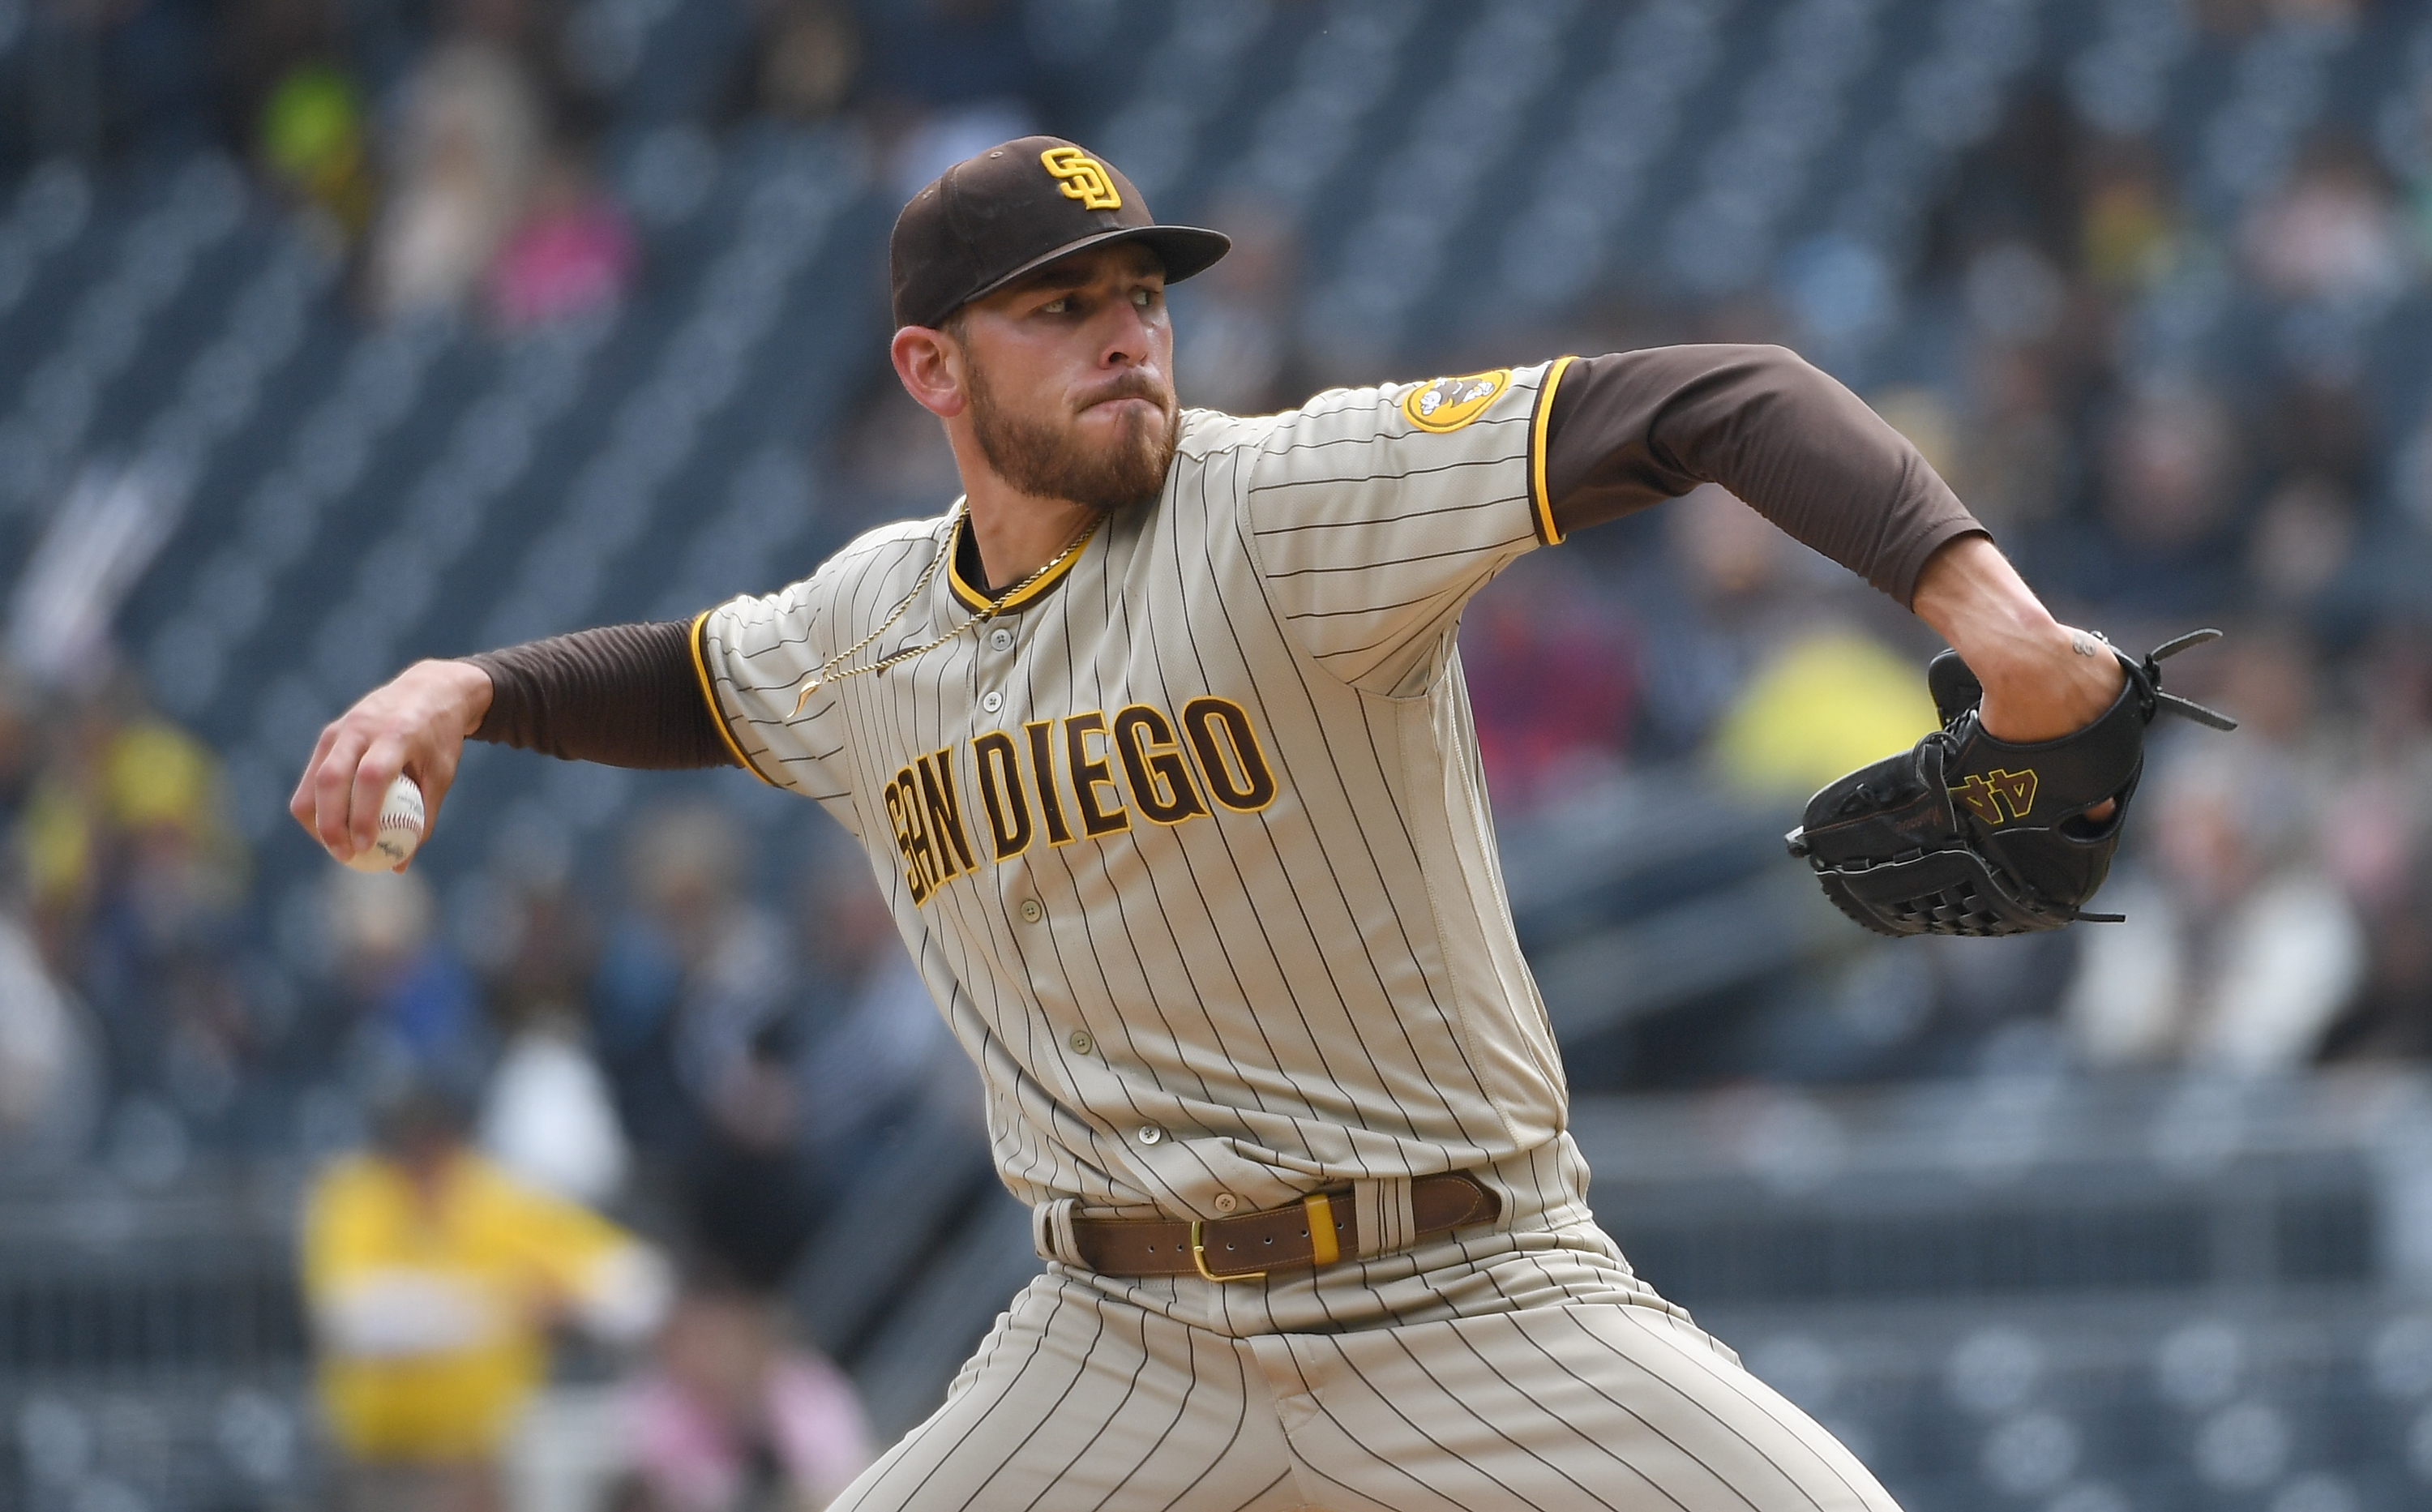 Padres starter Joe Musgrove sidelined at least 3 weeks due to